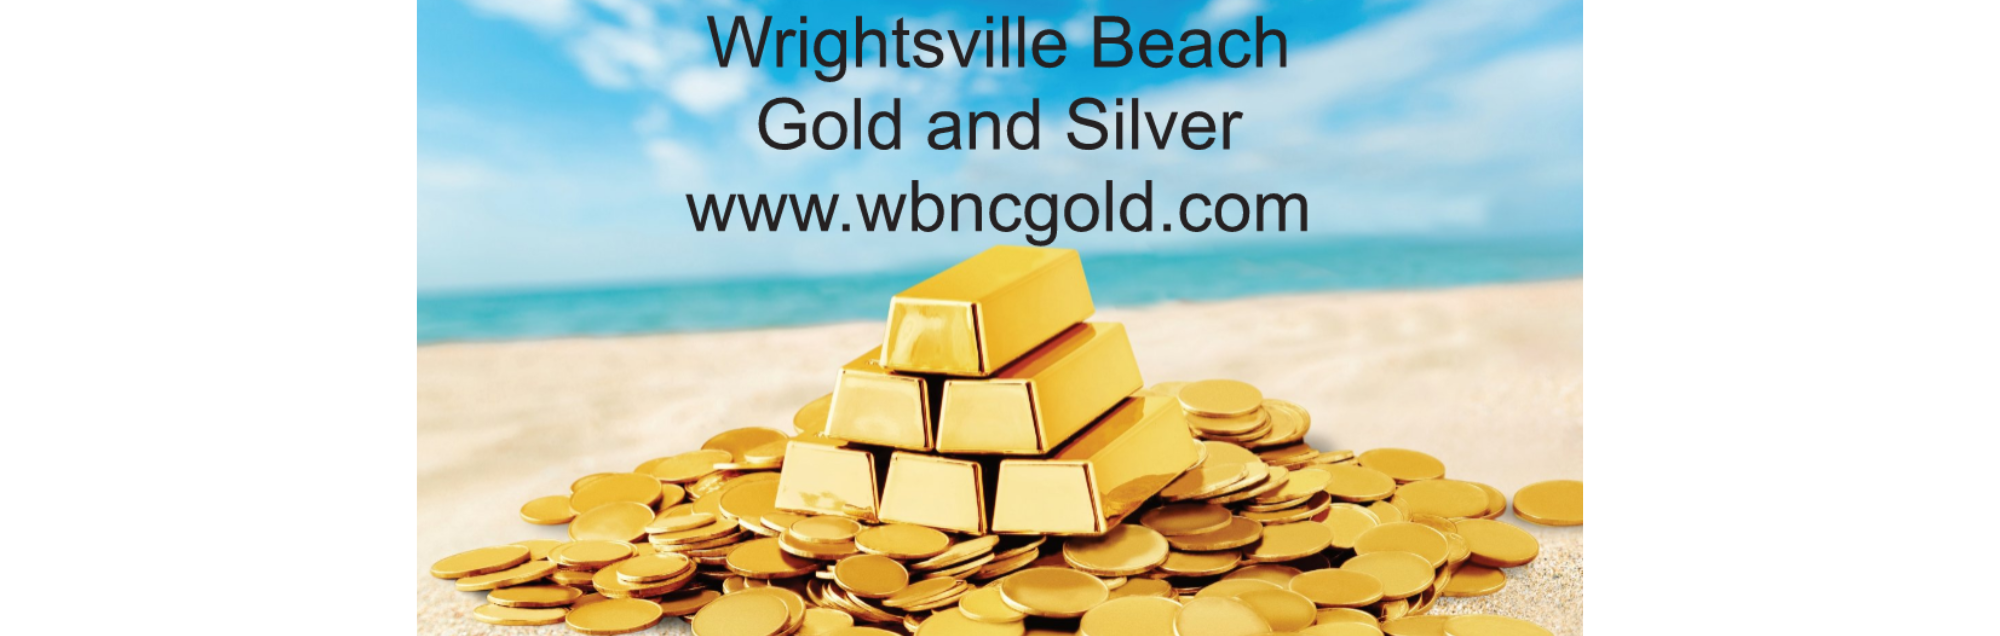 Wrightsville Beach Gold and Silver